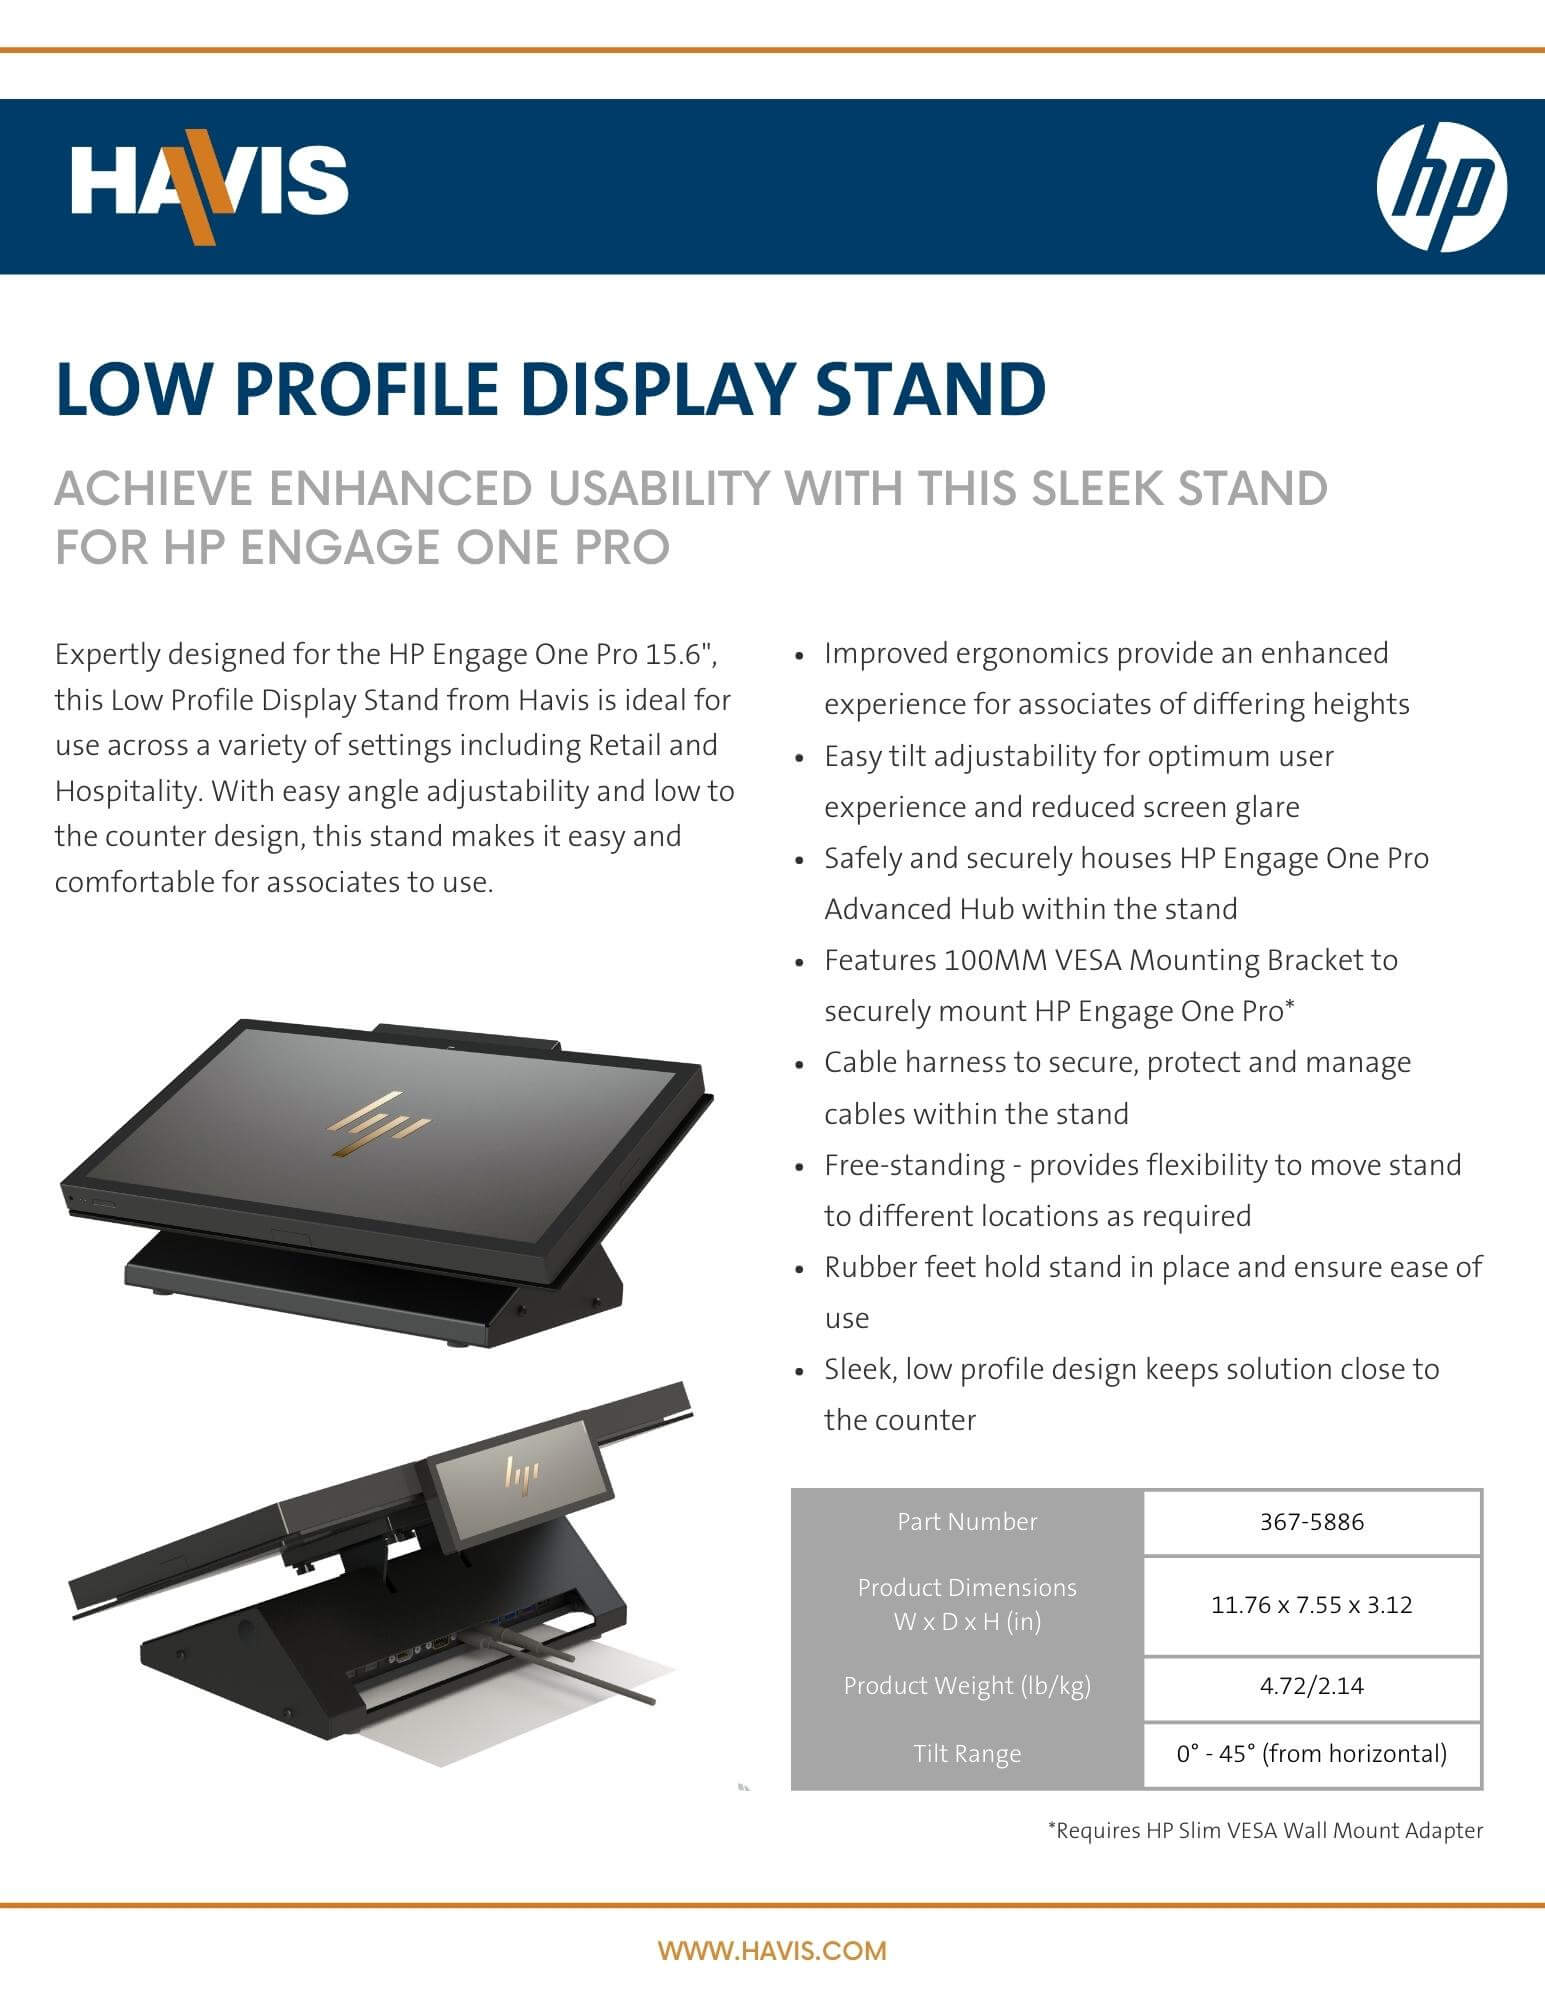 Low Profile Display Stand for HP Engage One Pro Datasheet